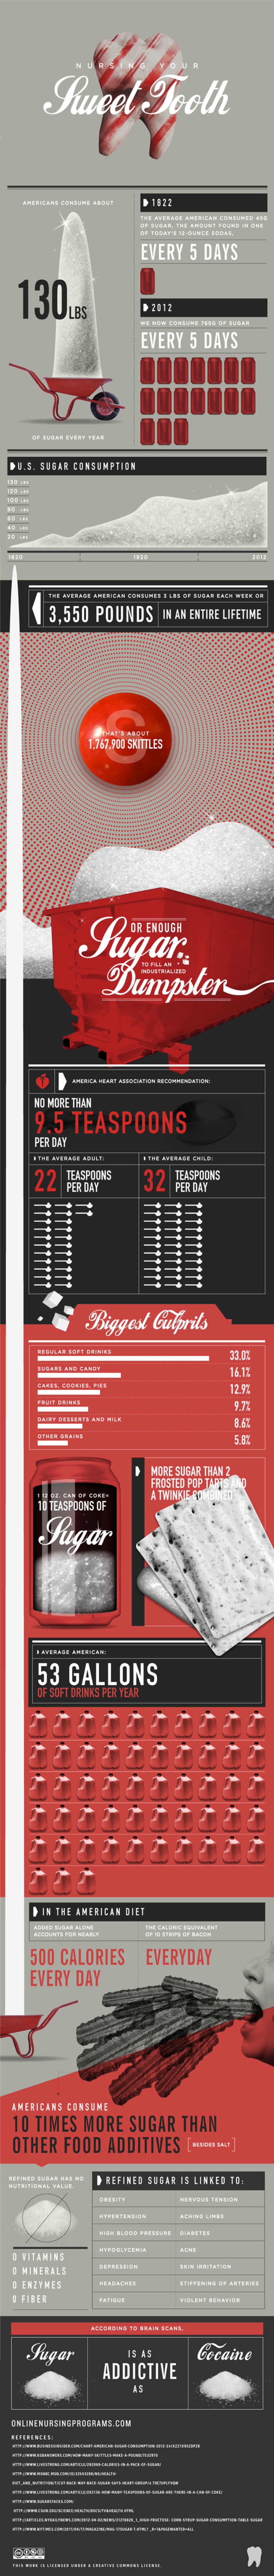 Mind-Blowing Sugar Consumption (Infographic)